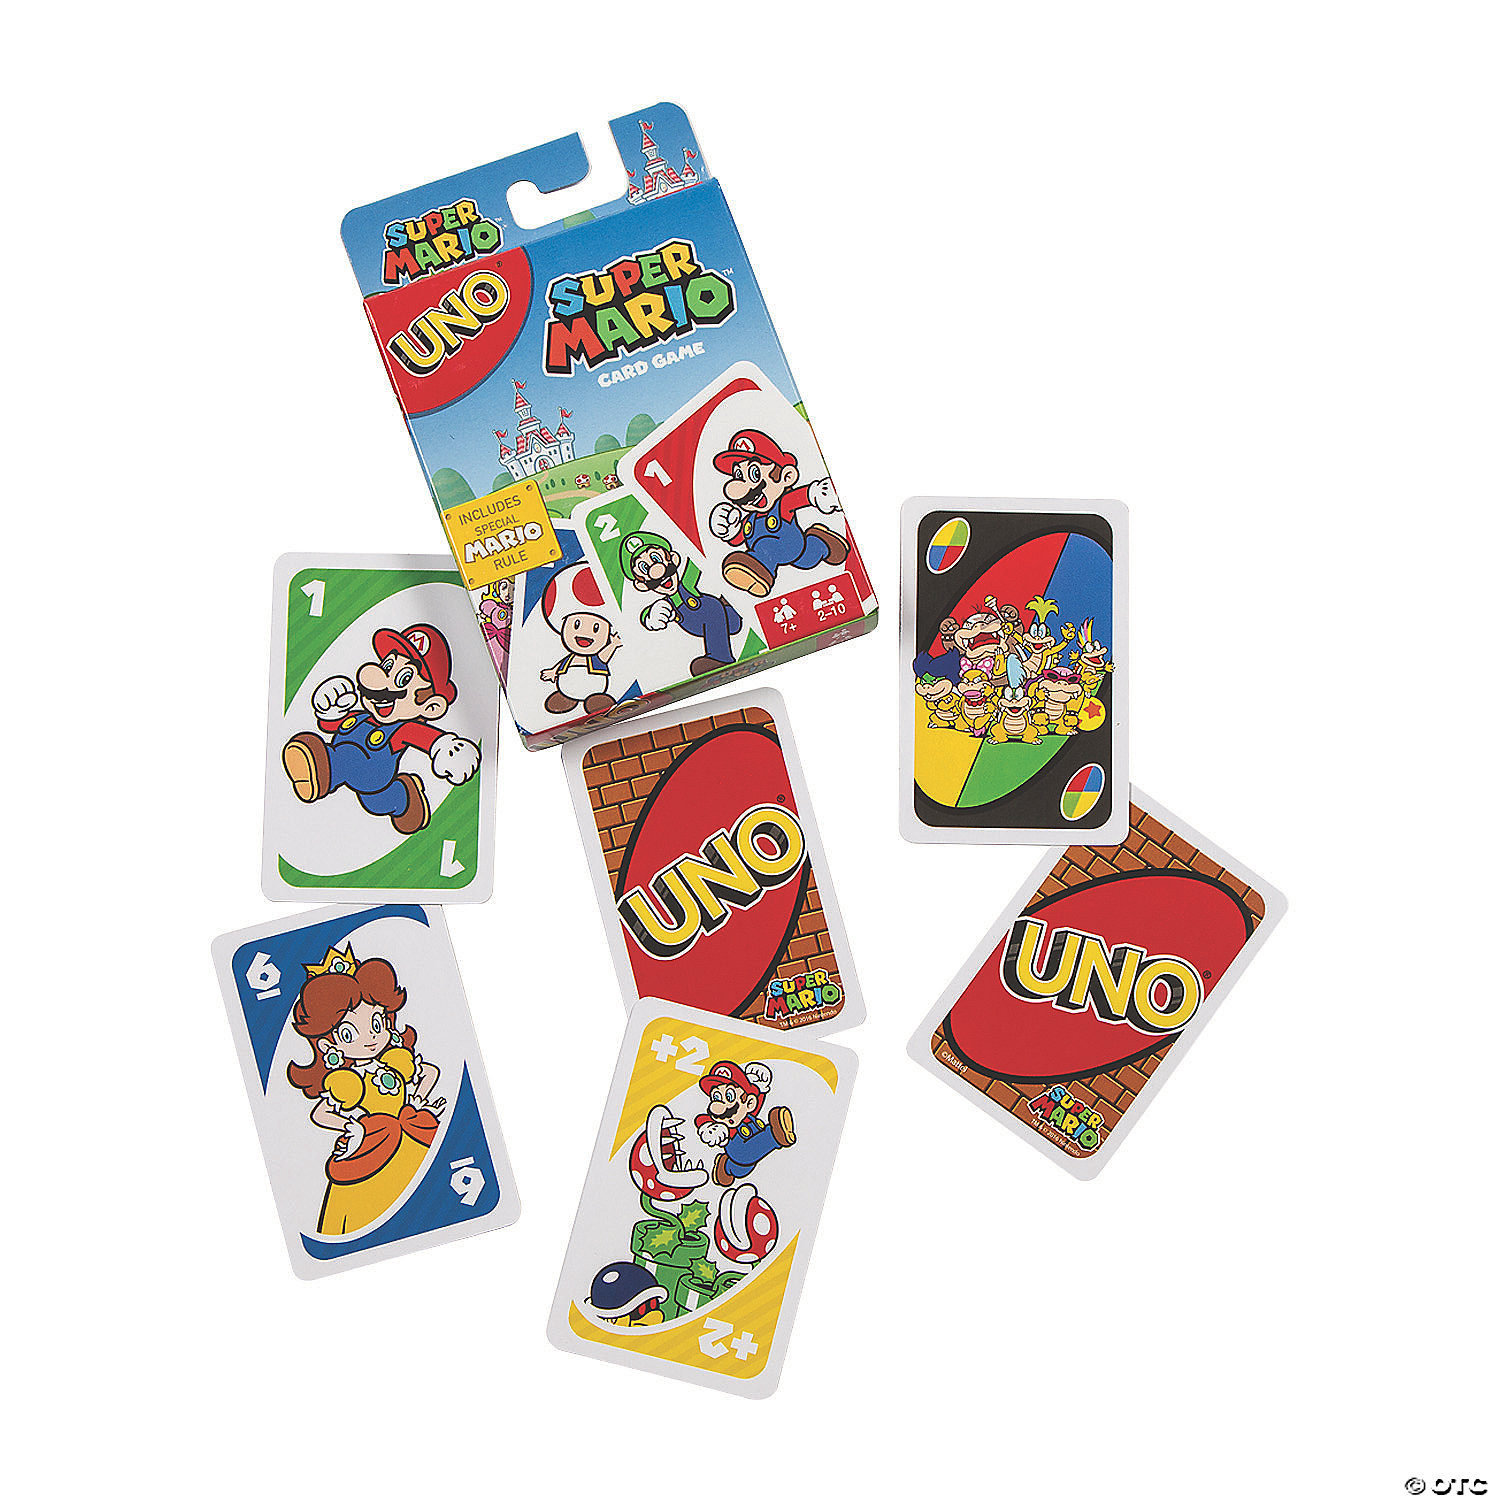 UNO Emoji Card Game For 2 to 10 Players 